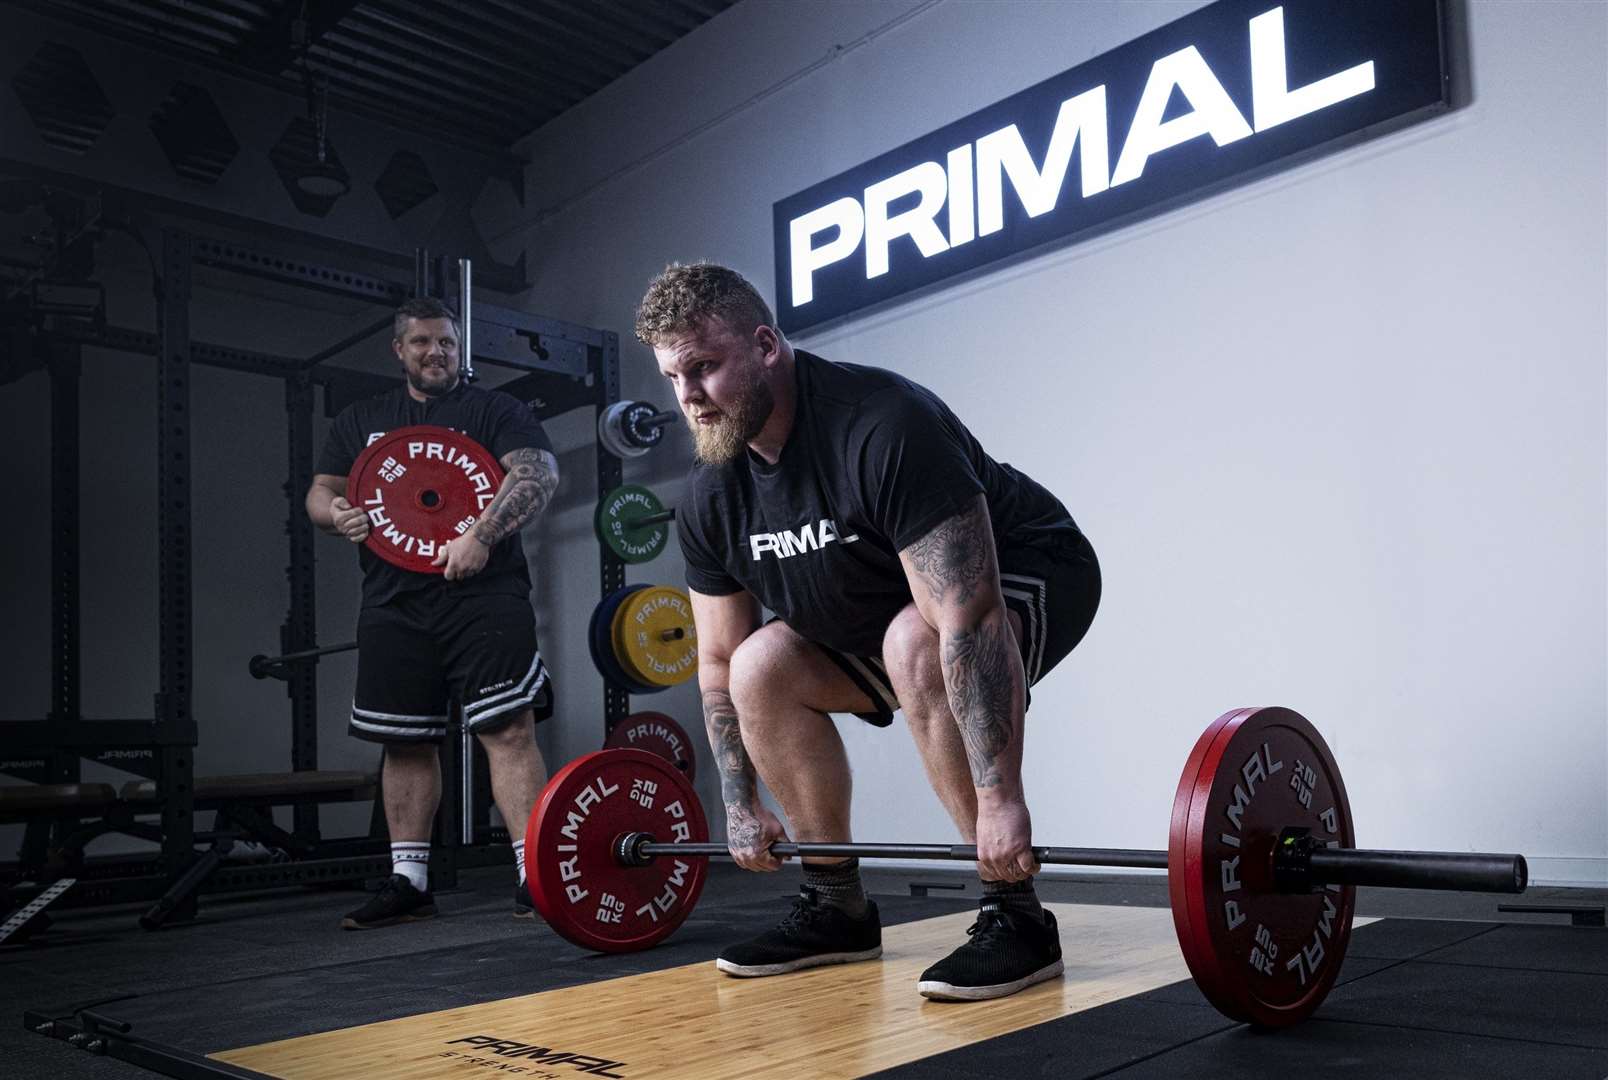 The brothers have teamed up with Primal.